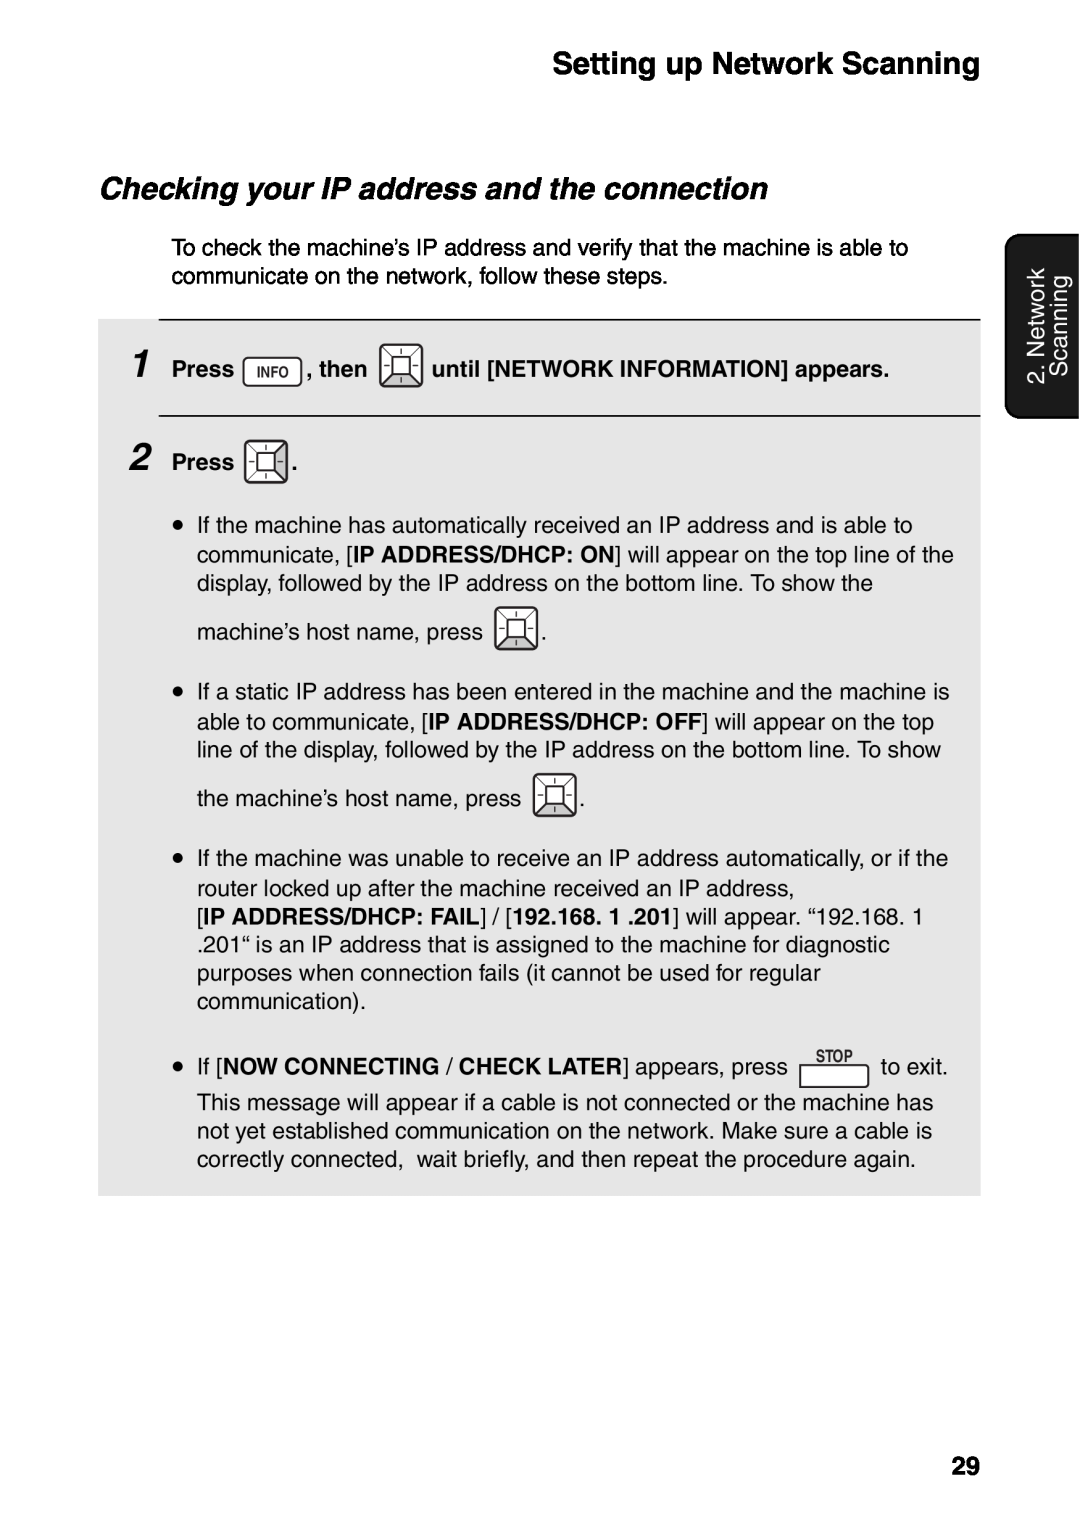 Sharp FO-IS115N operation manual Checking your IP address and the connection, Network Scanning 